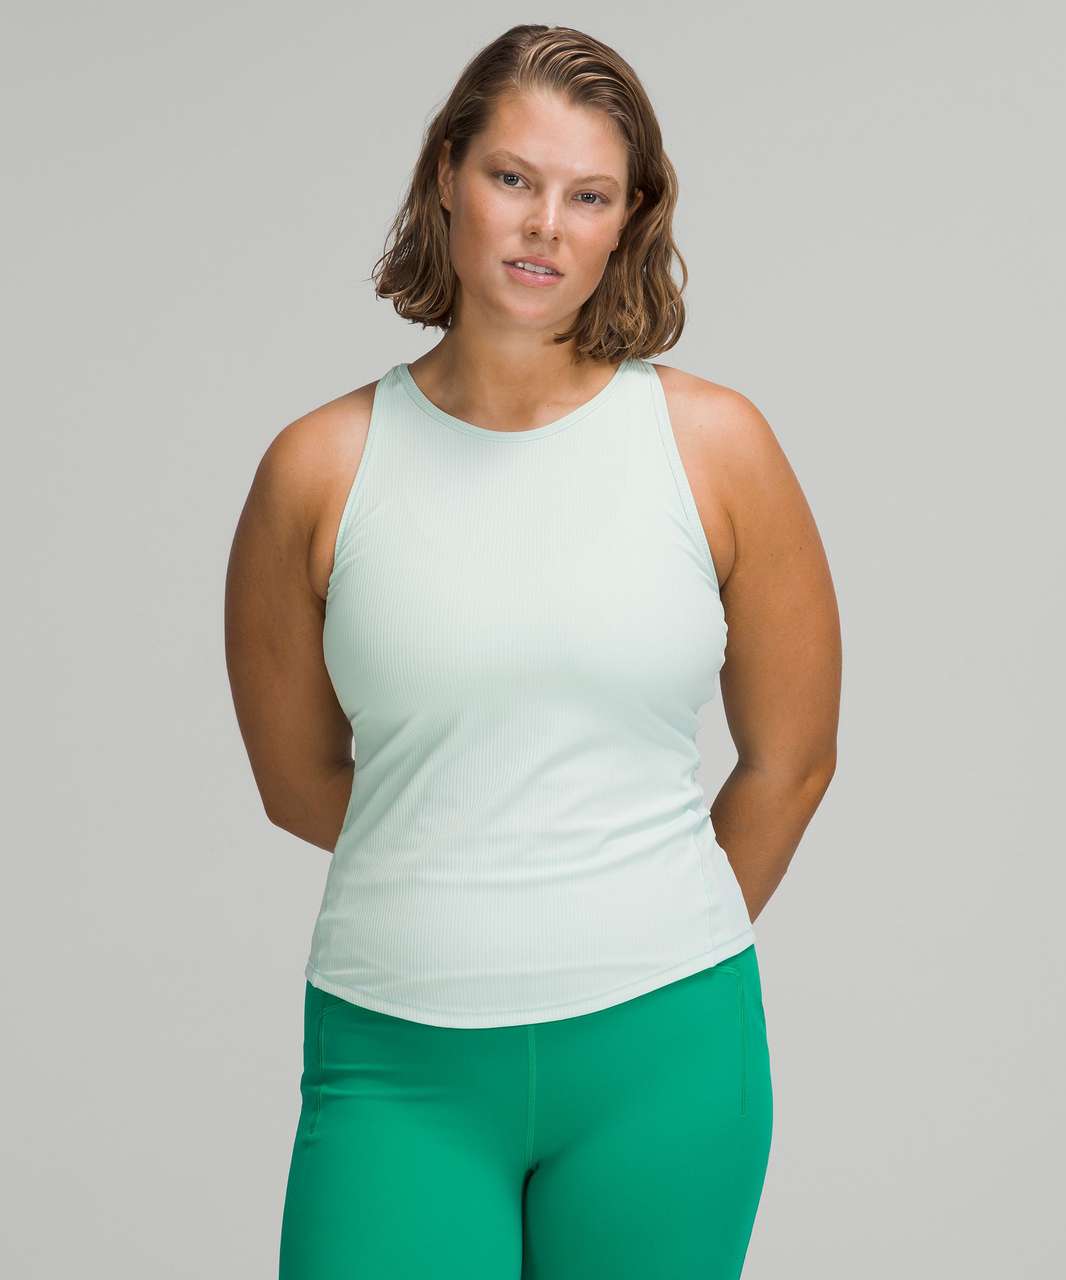 Base pace ribbed tank in blazer blue tone (8), track that mid-rise 5”  shorts in wild mint (6) : r/lululemon